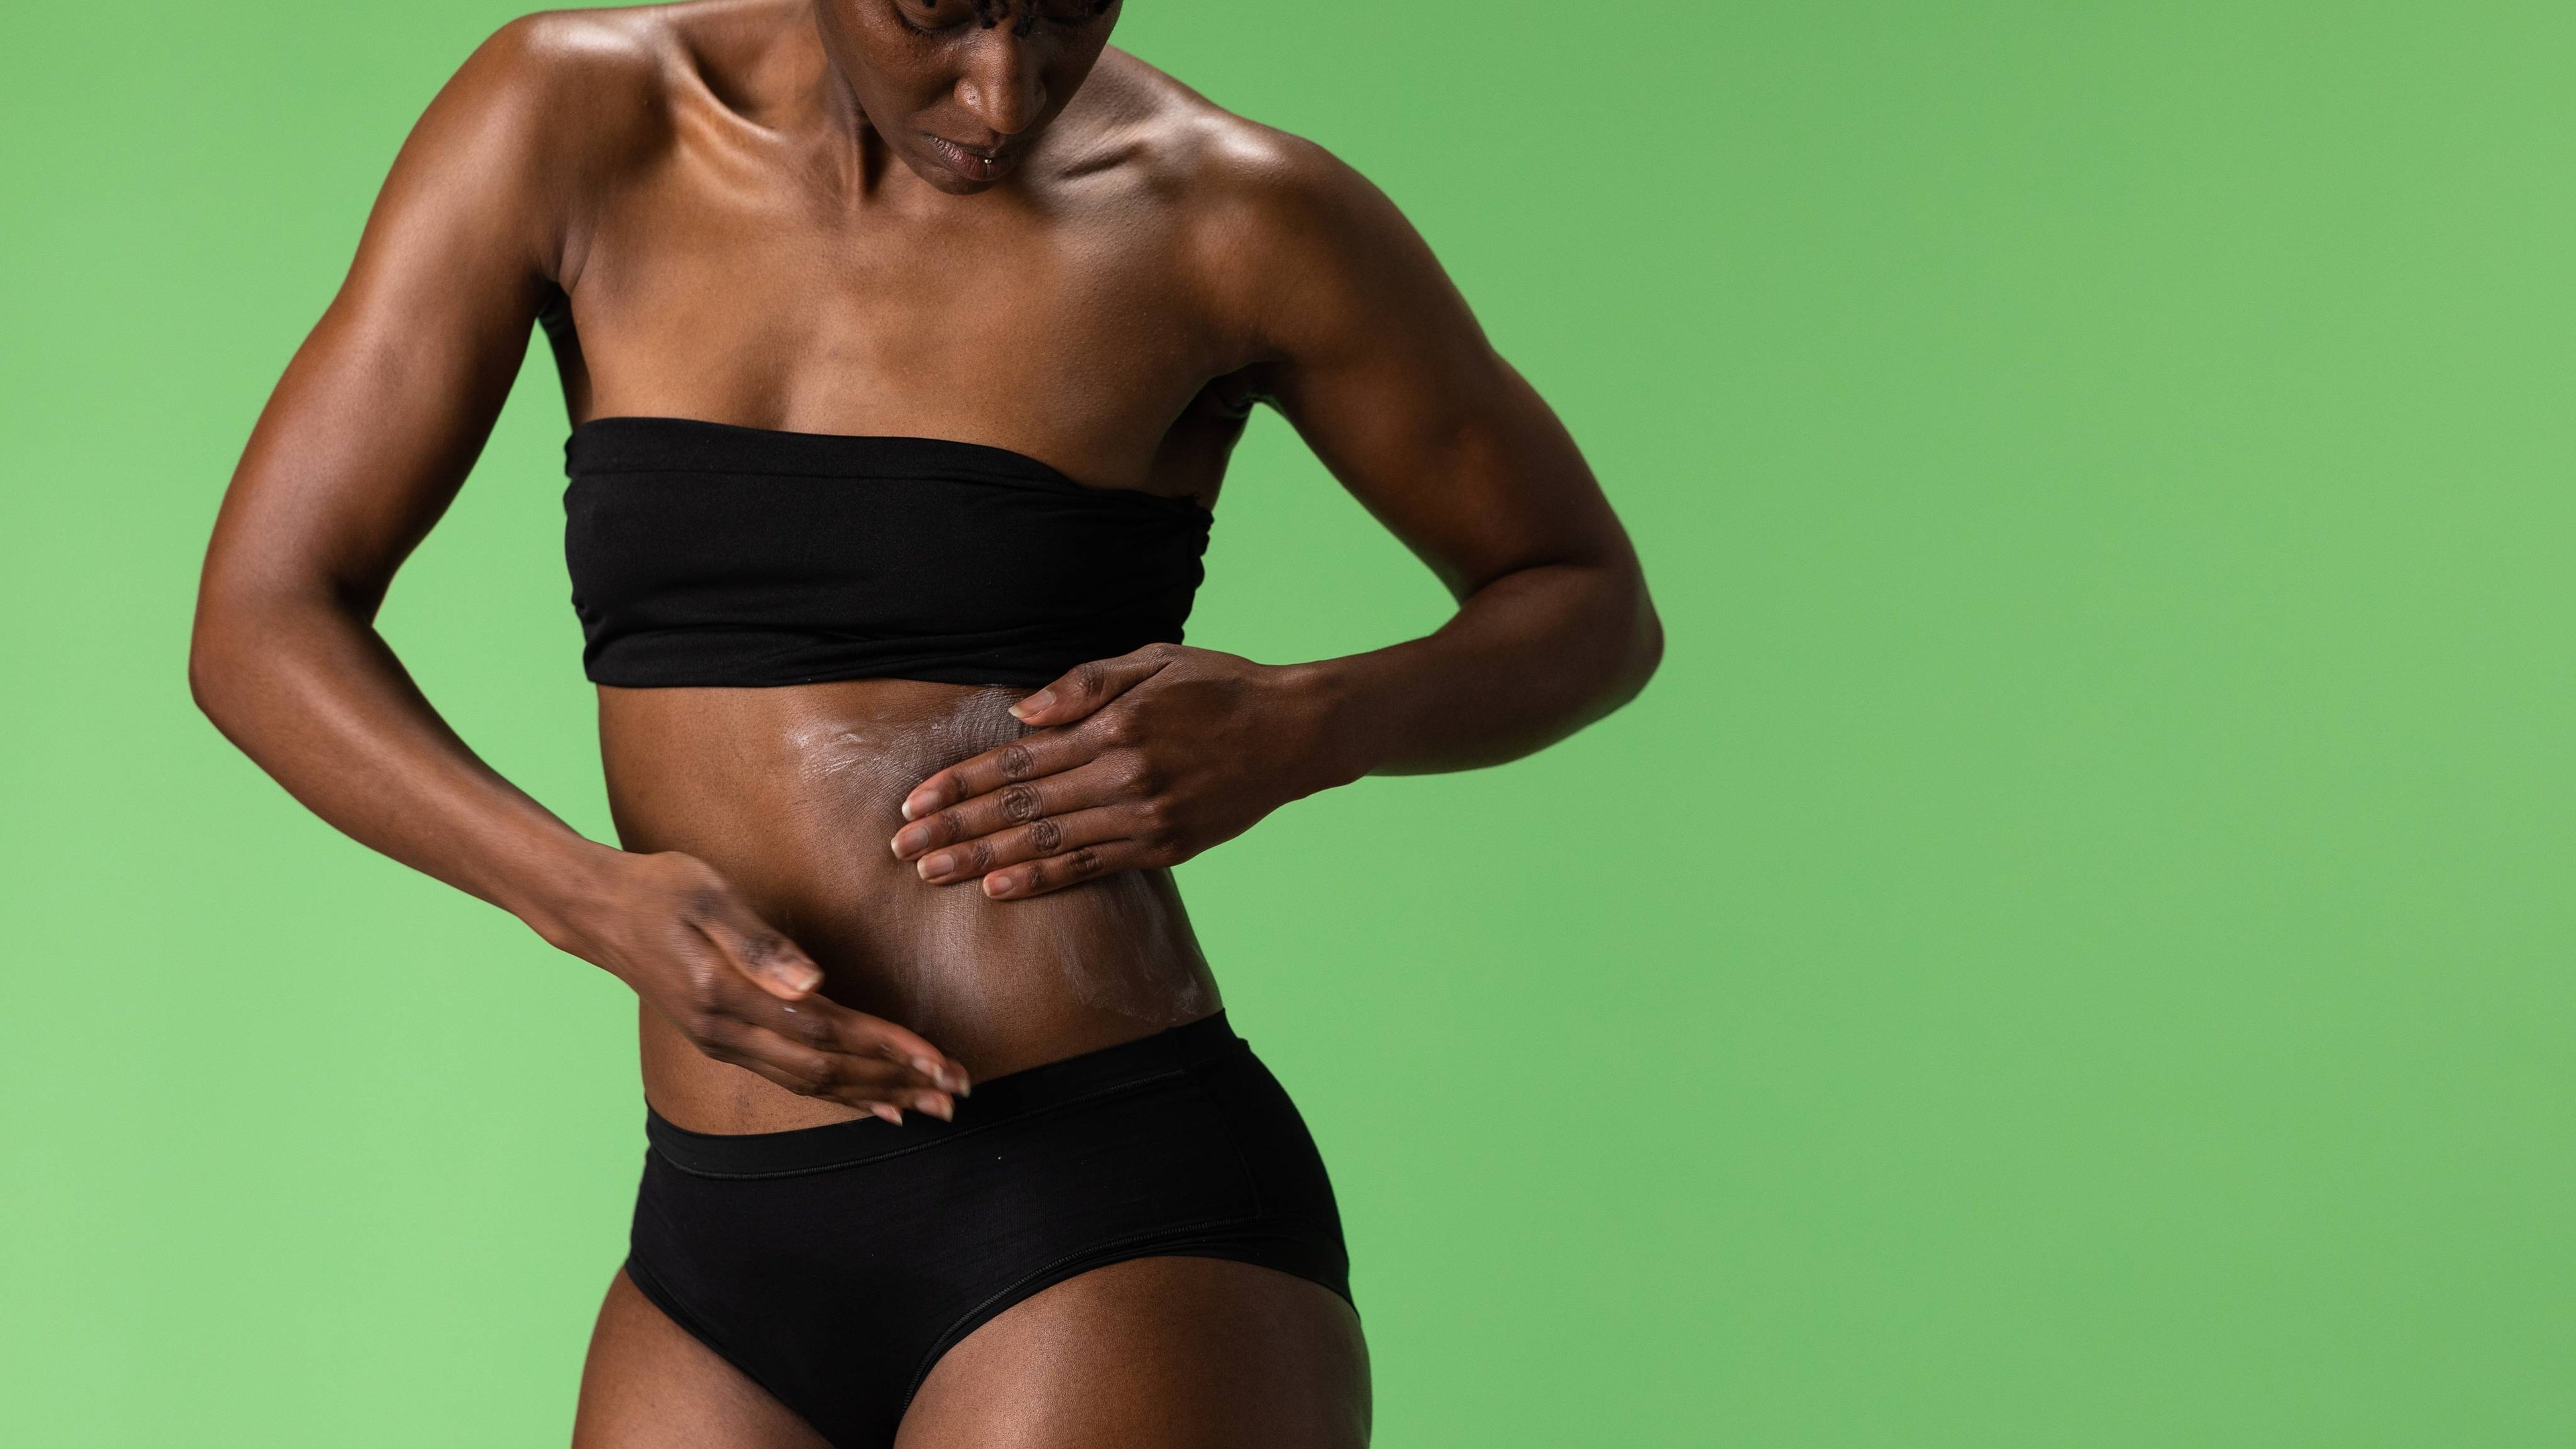 The model is on a fern-green background wearing a black bandeau bra and underwear as they apply the Lime Bounty body butter to their side and stomach area. 